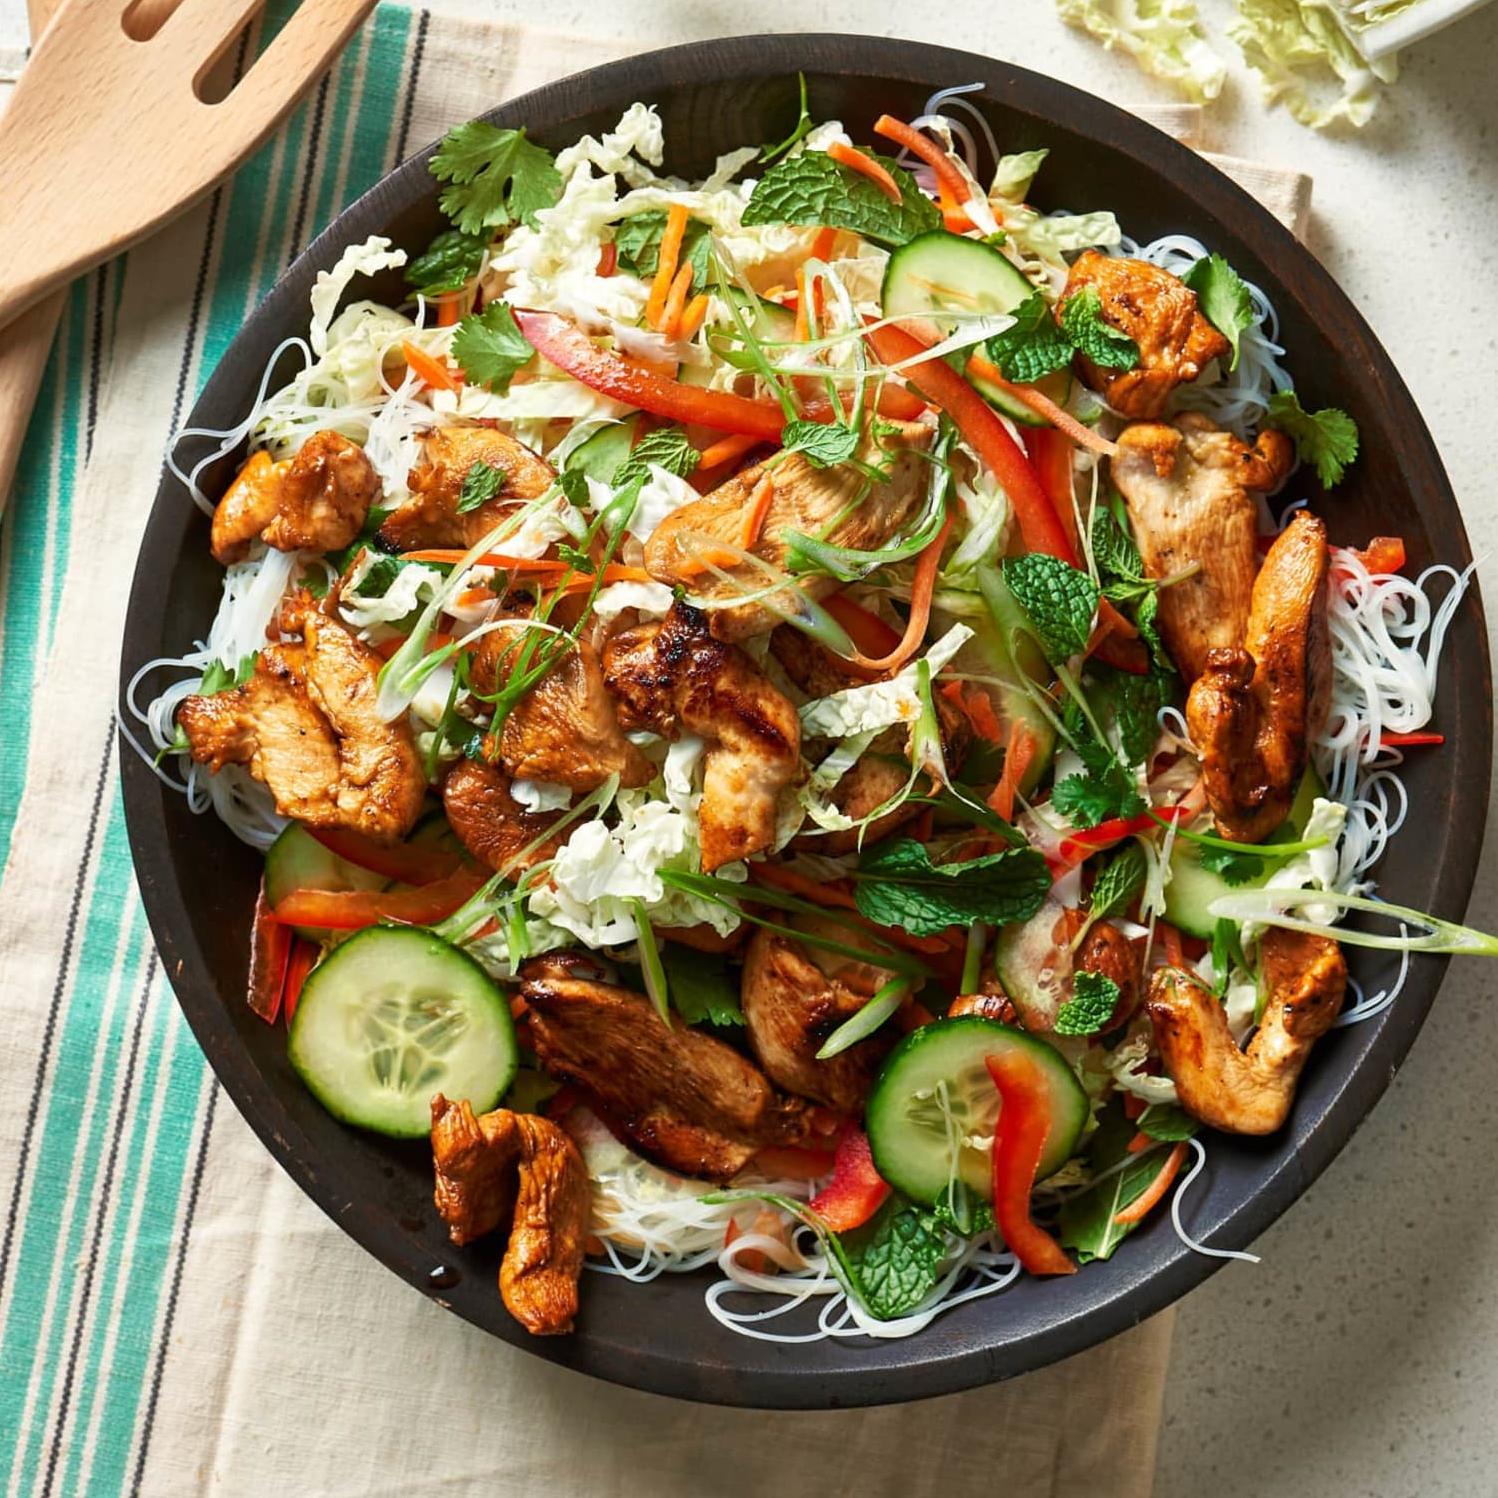  Fresh and healthy, this Vietnamese-Style Chicken Salad is perfect for a light lunch or dinner.